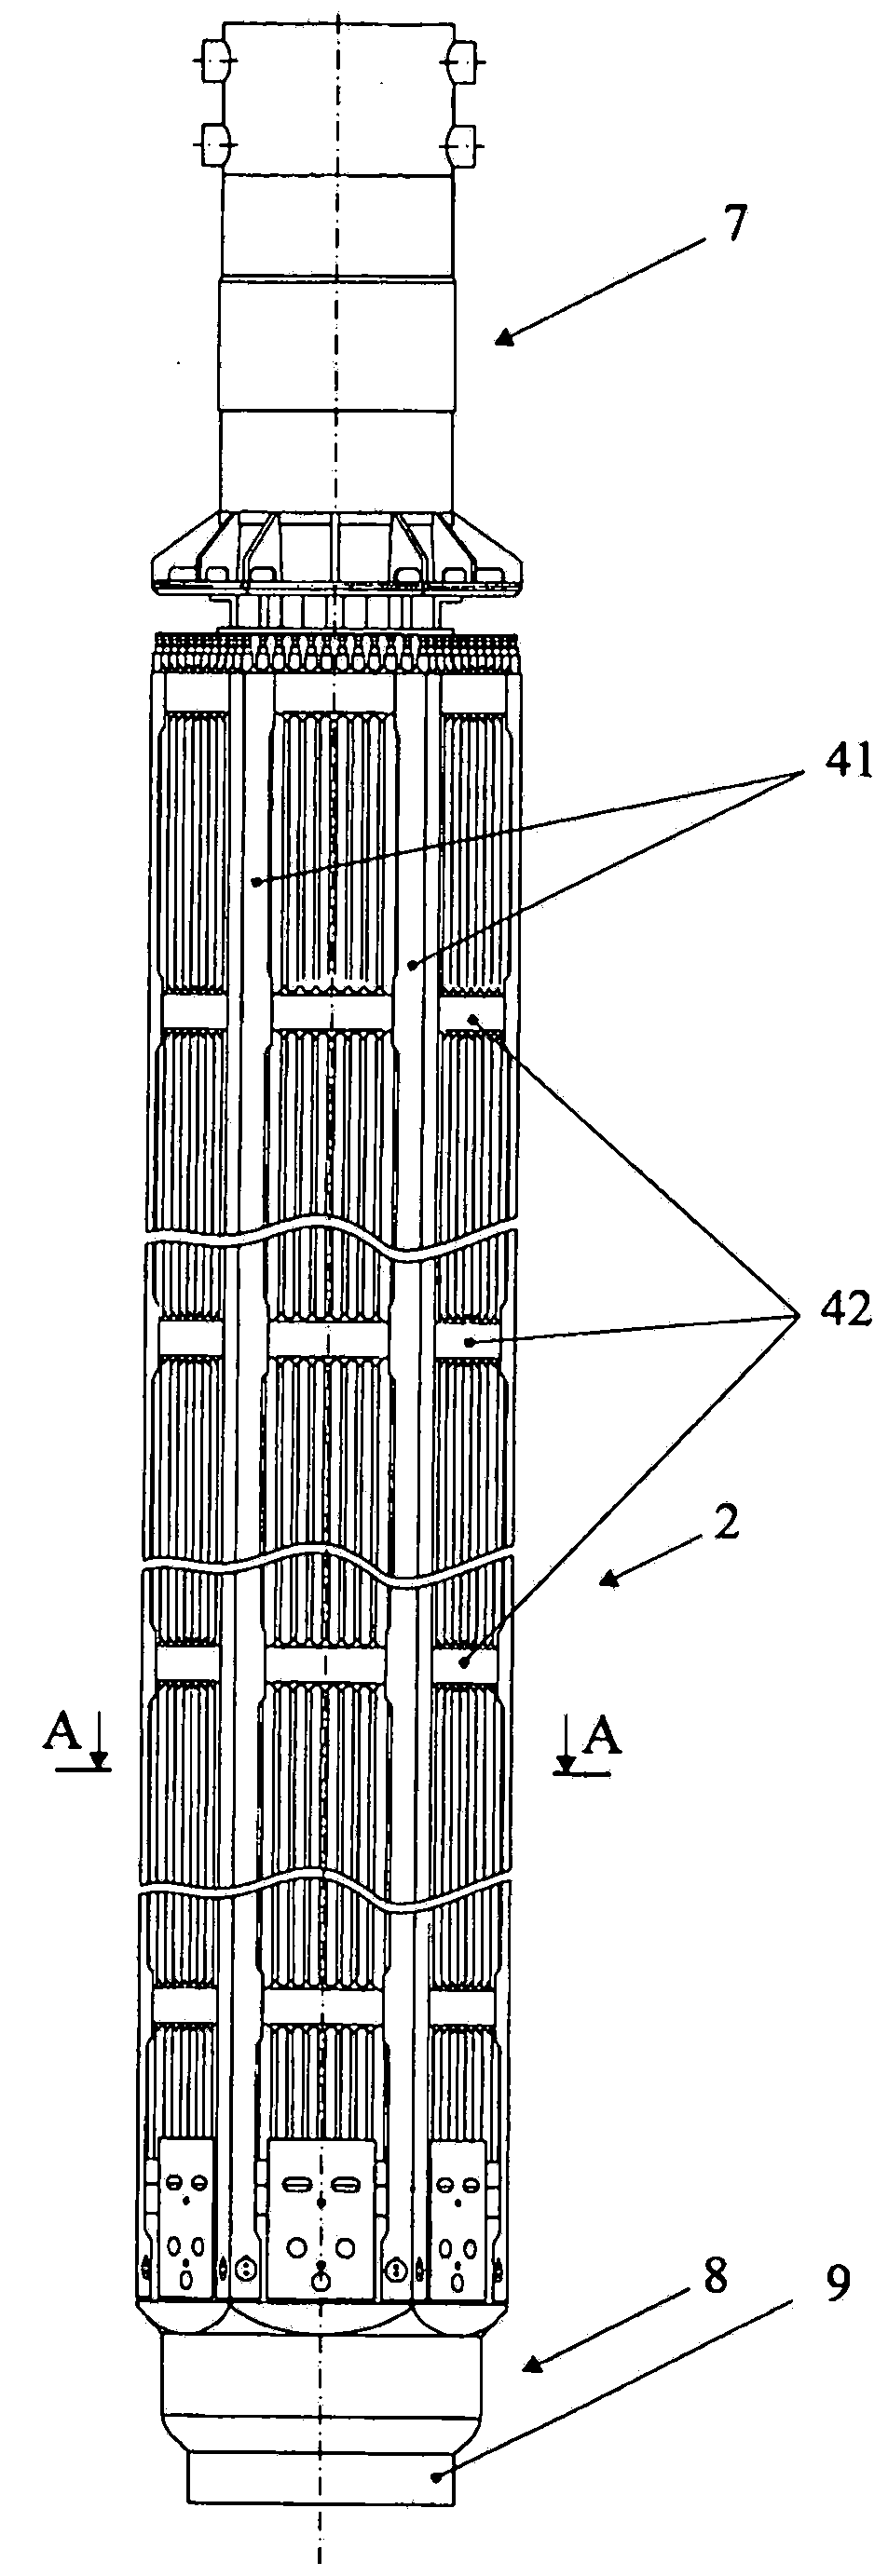 Nuclear reactor (optional), fuel assembly for seed-blanket subassembly of nuclear reactor (optional) as well as fuel element for fuel assembly